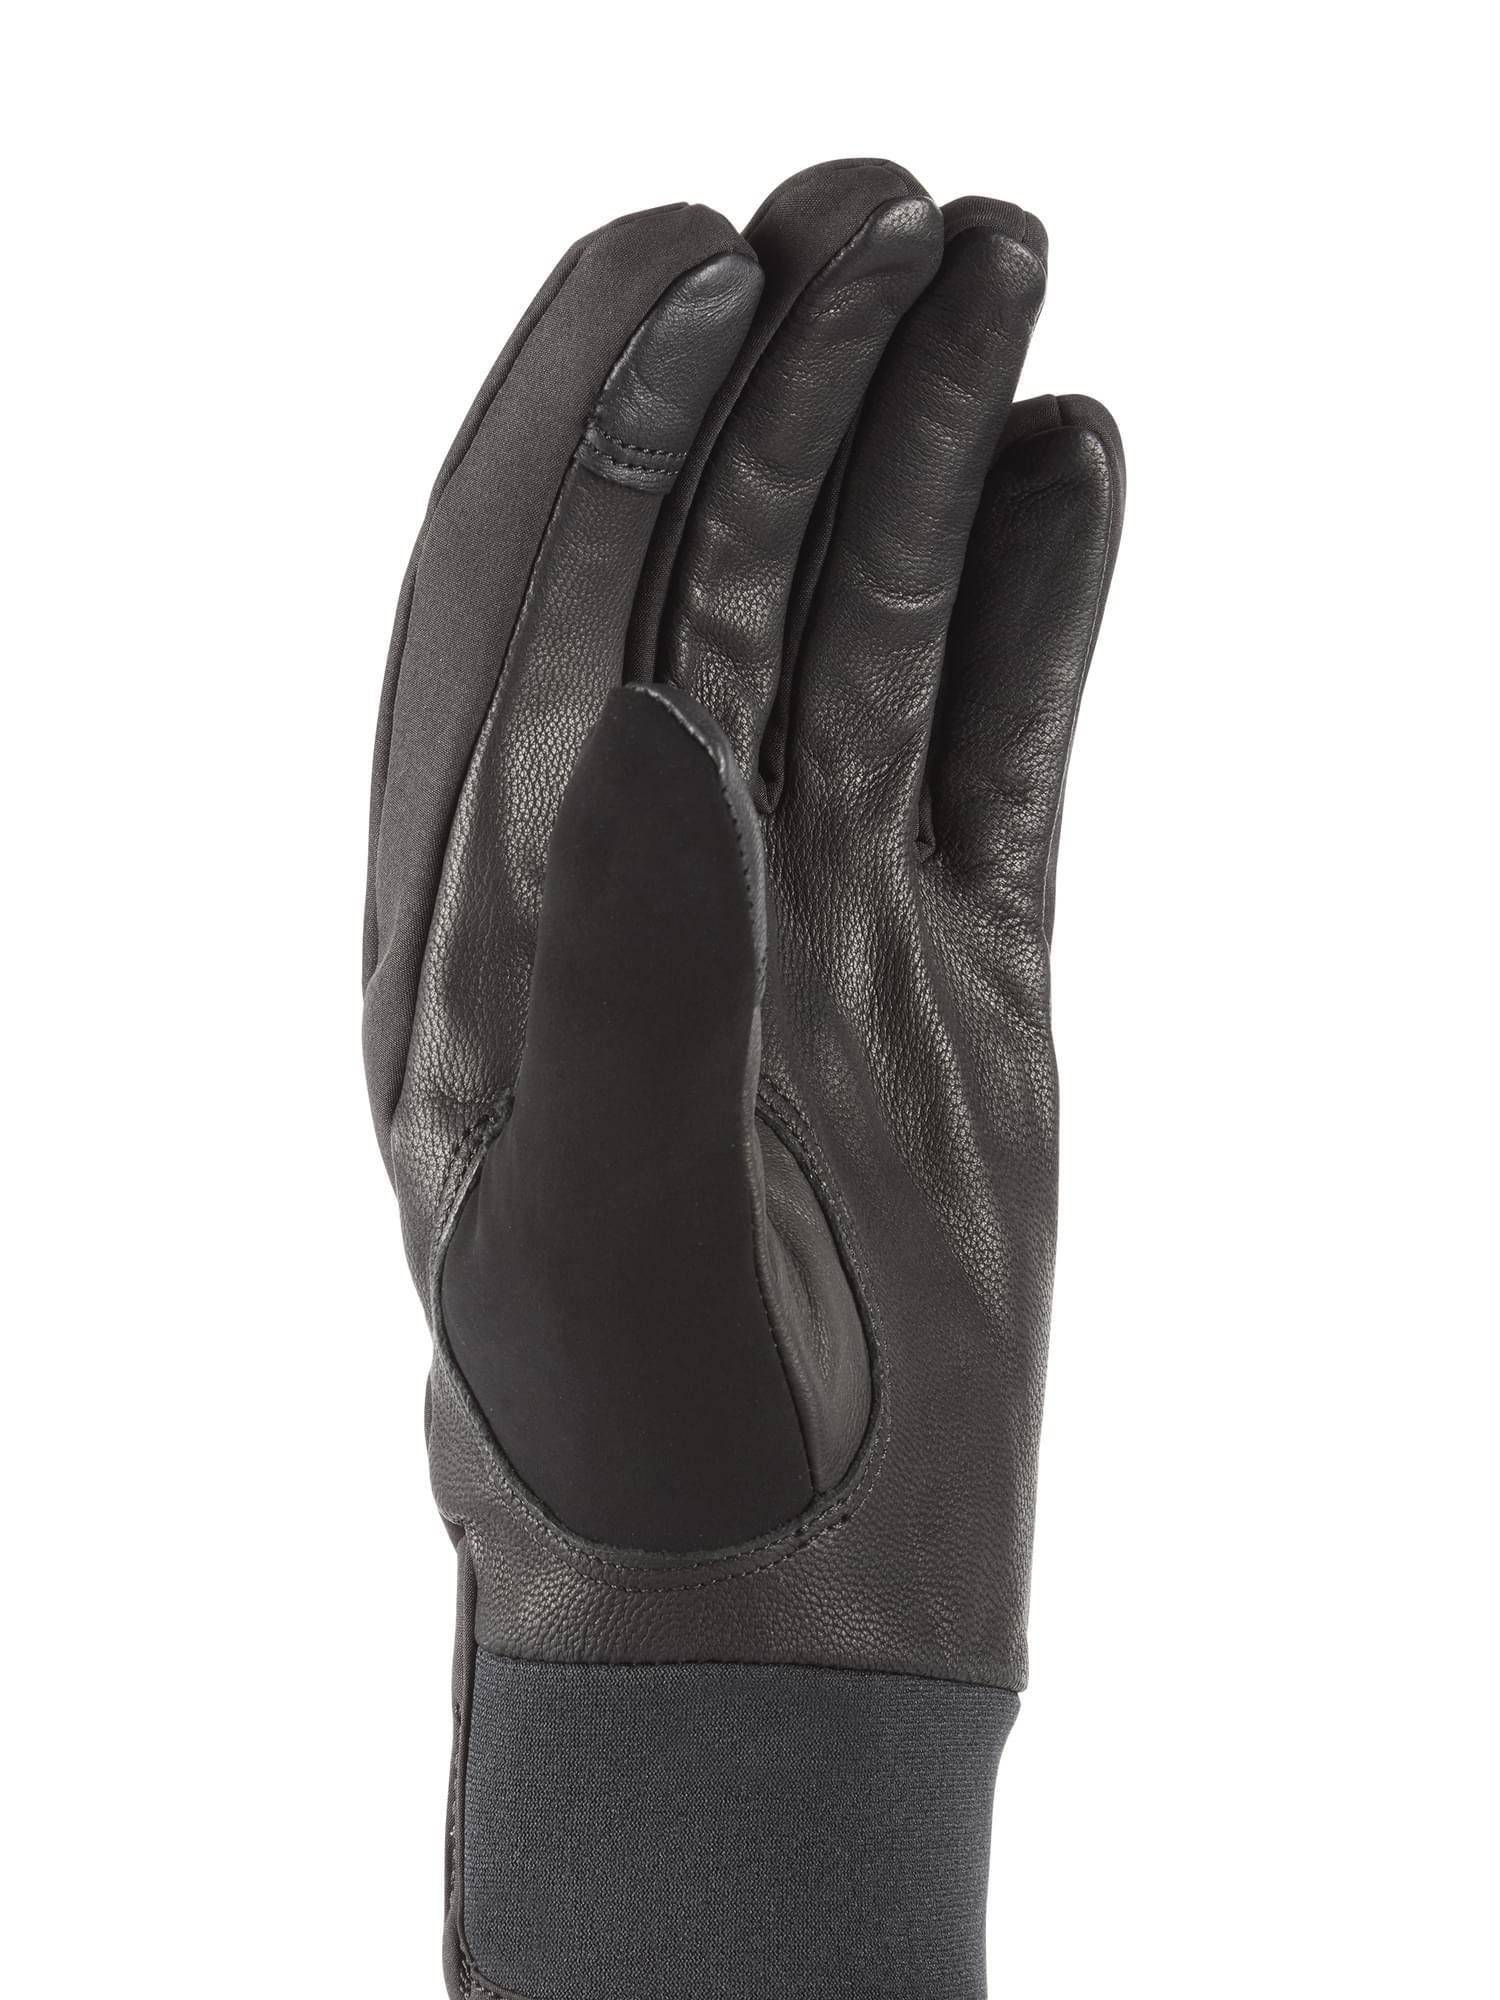 Mens Waterproof All Weather Insulated Gloves 2/3